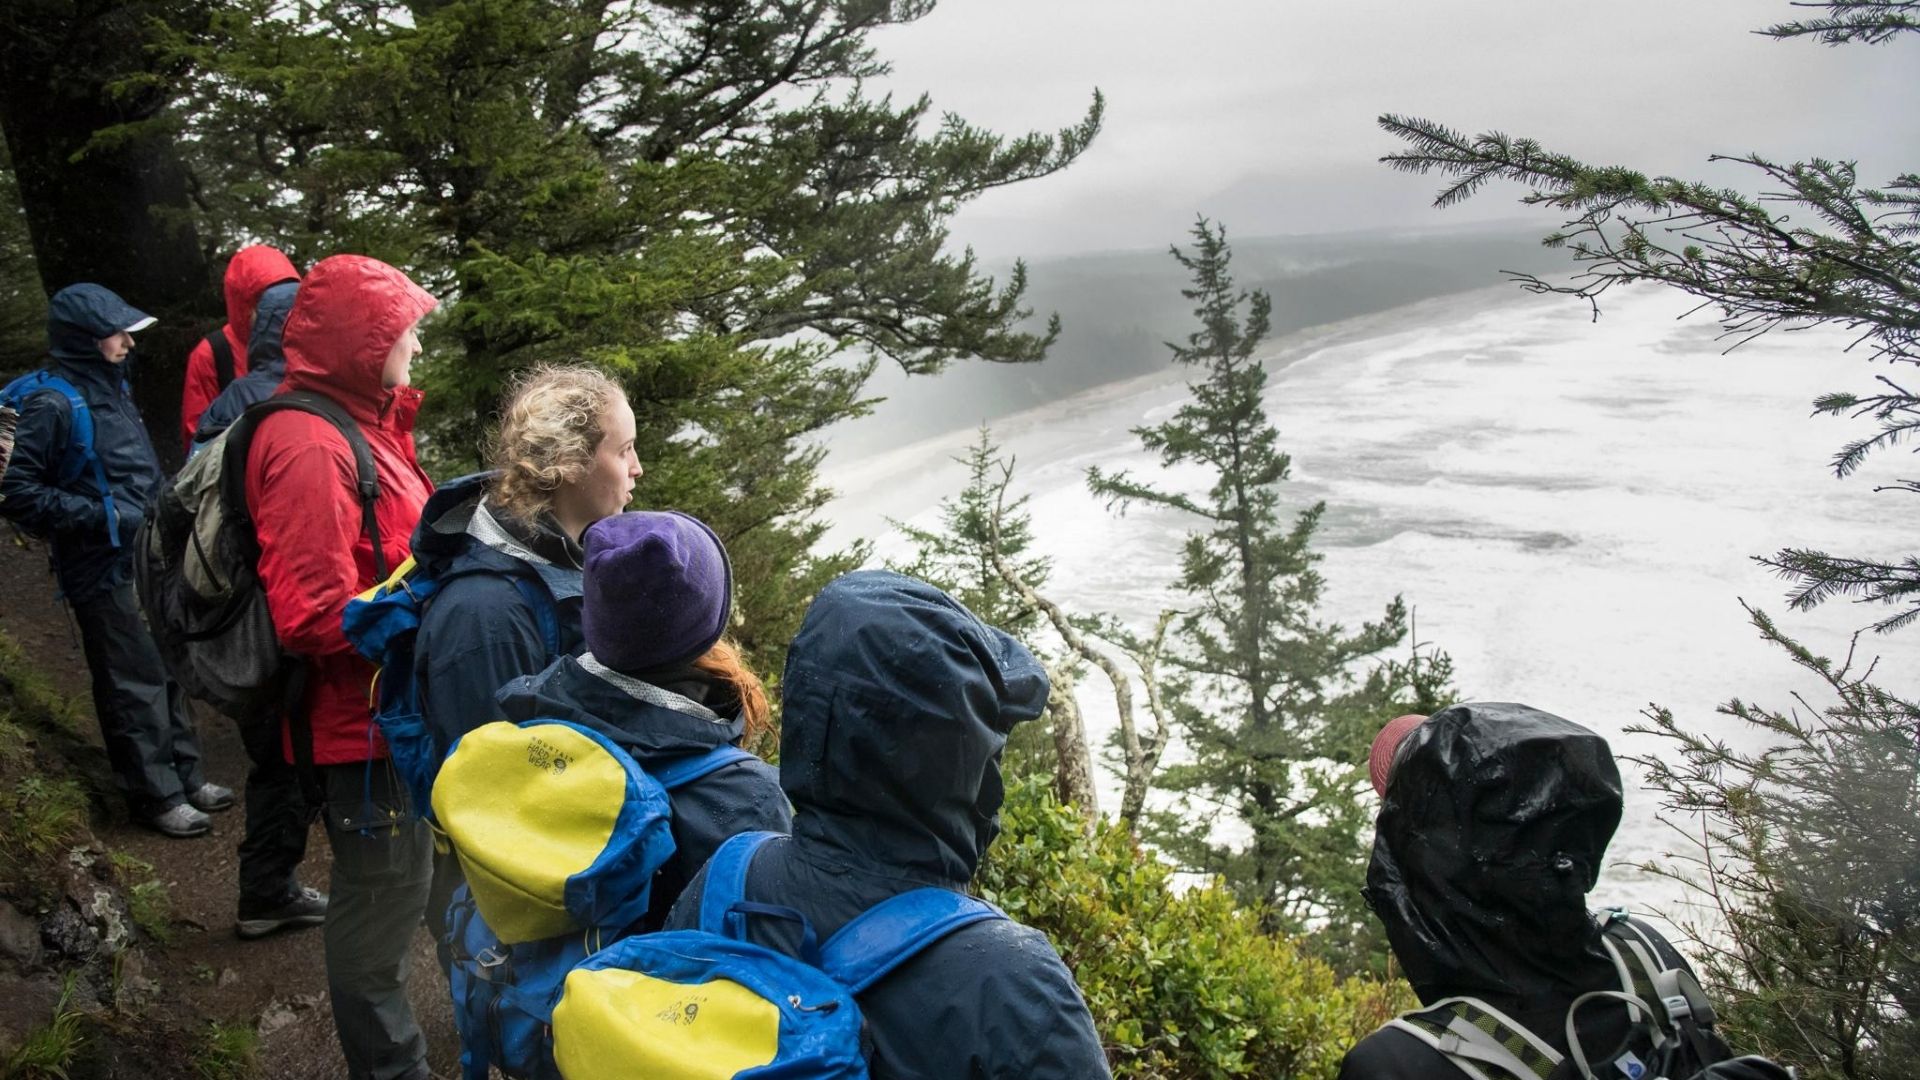 College group in rain jackets on hike at Oregon Coast